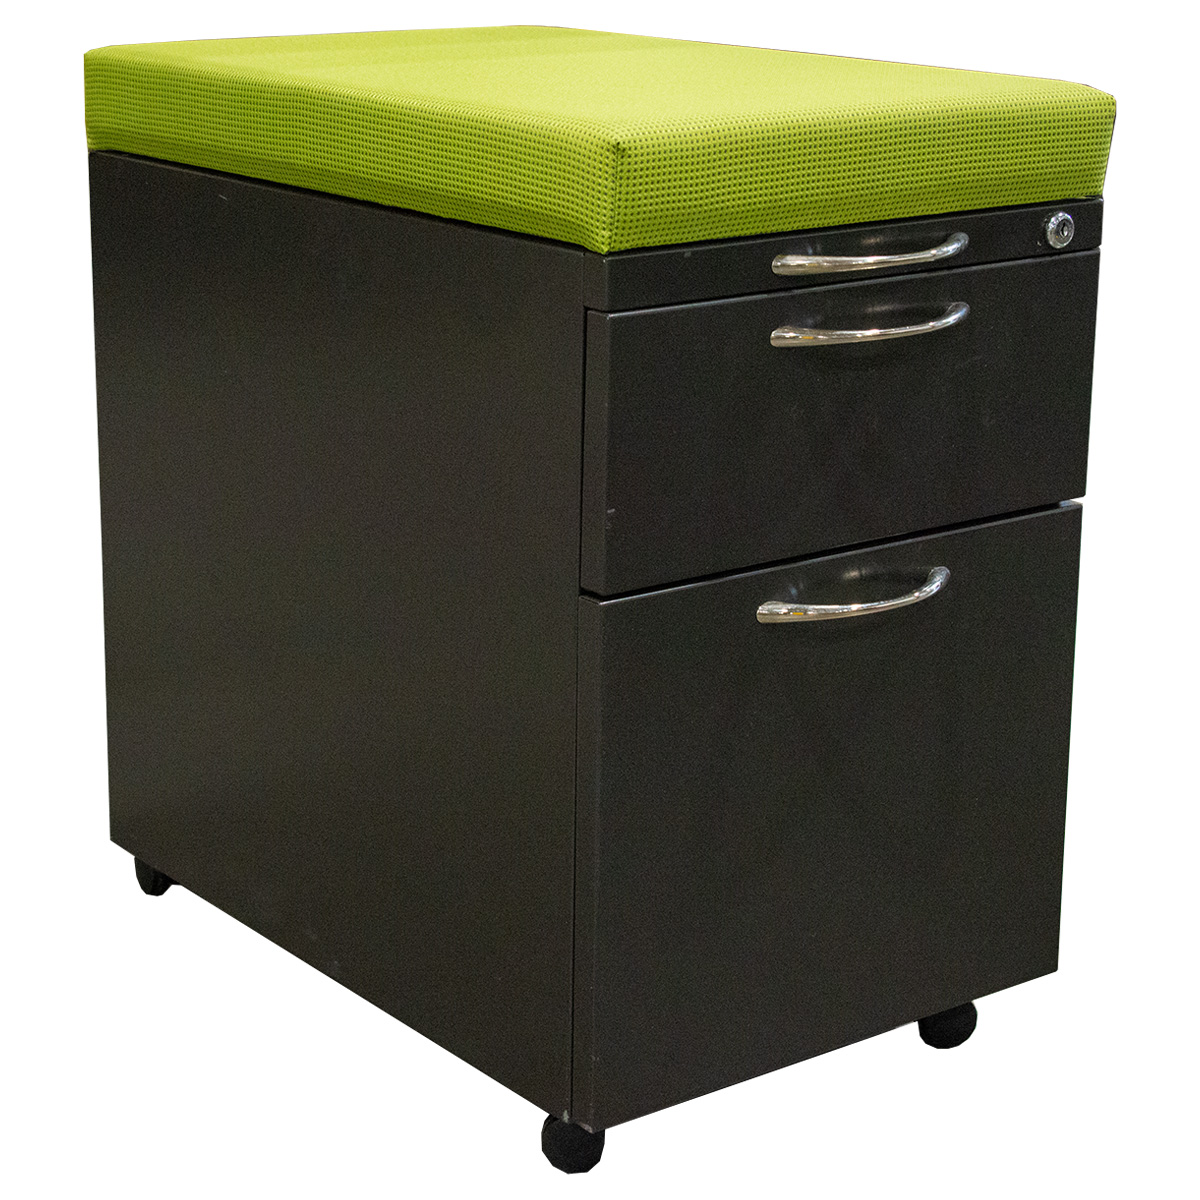 Introducing the AIS Dark Grey Mobile Pedestal with Green Cushion Topper, a versatile and space-efficient storage solution for any modern workspace. With dimensions of 15"W x 22.5"D x 23.5"H, this pedestal offers ample room for documents and supplies while its mobile design ensures easy access and mobility. The addition of a vibrant green cushion topper adds comfort and style, making it perfect for impromptu seating or as a footrest. Upgrade your office with this sleek and functional pedestal.